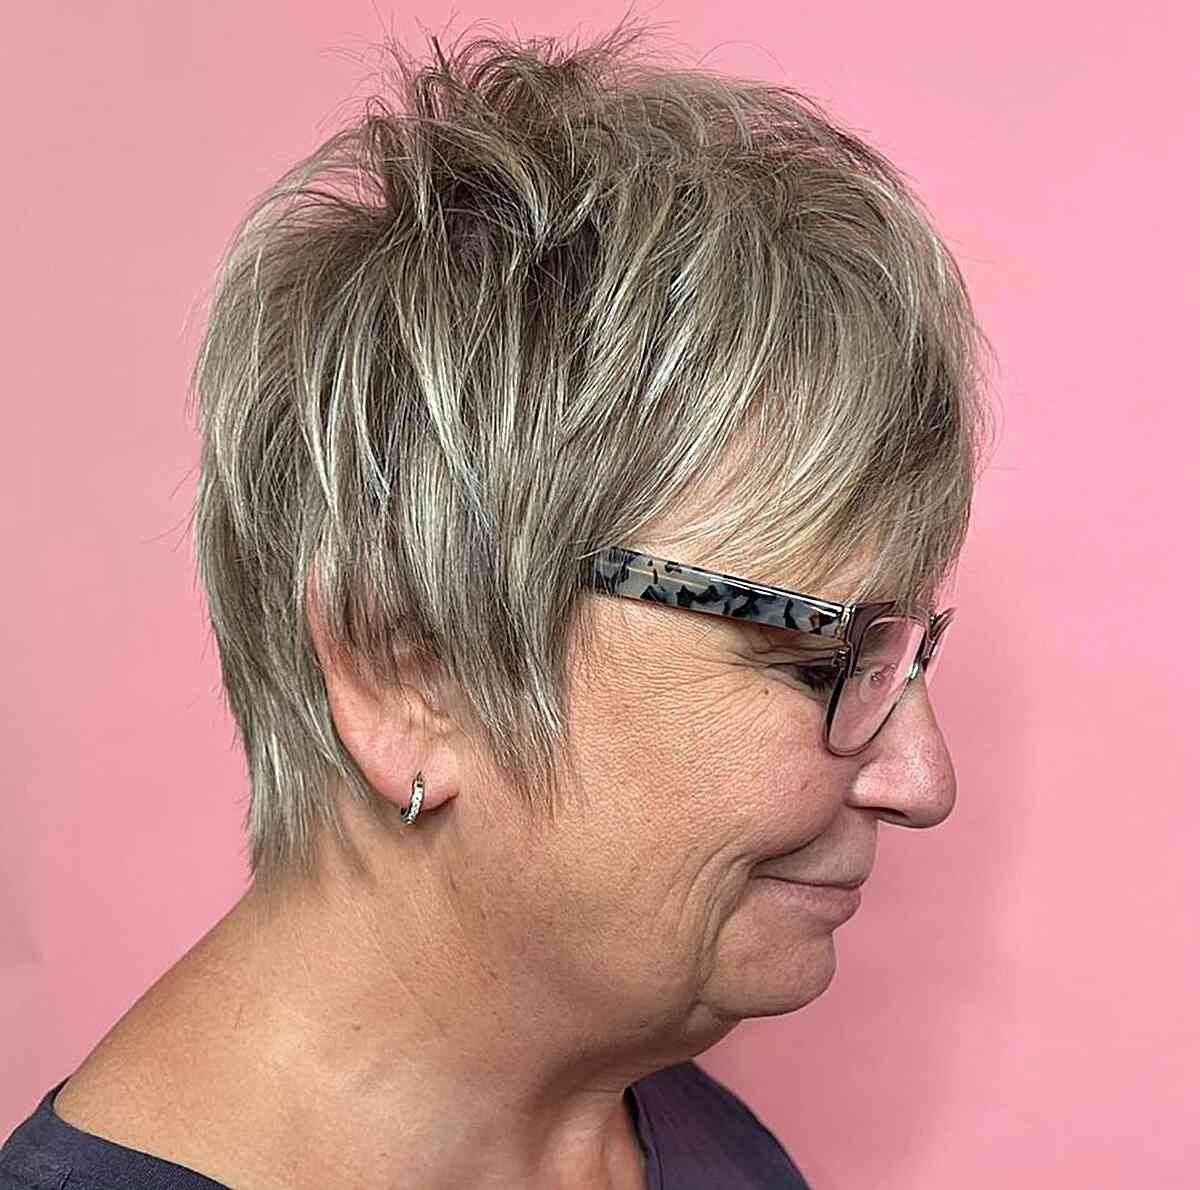 Short Wispy Pixie Cut with Piece-y Layers for women 60 and up with Glasses